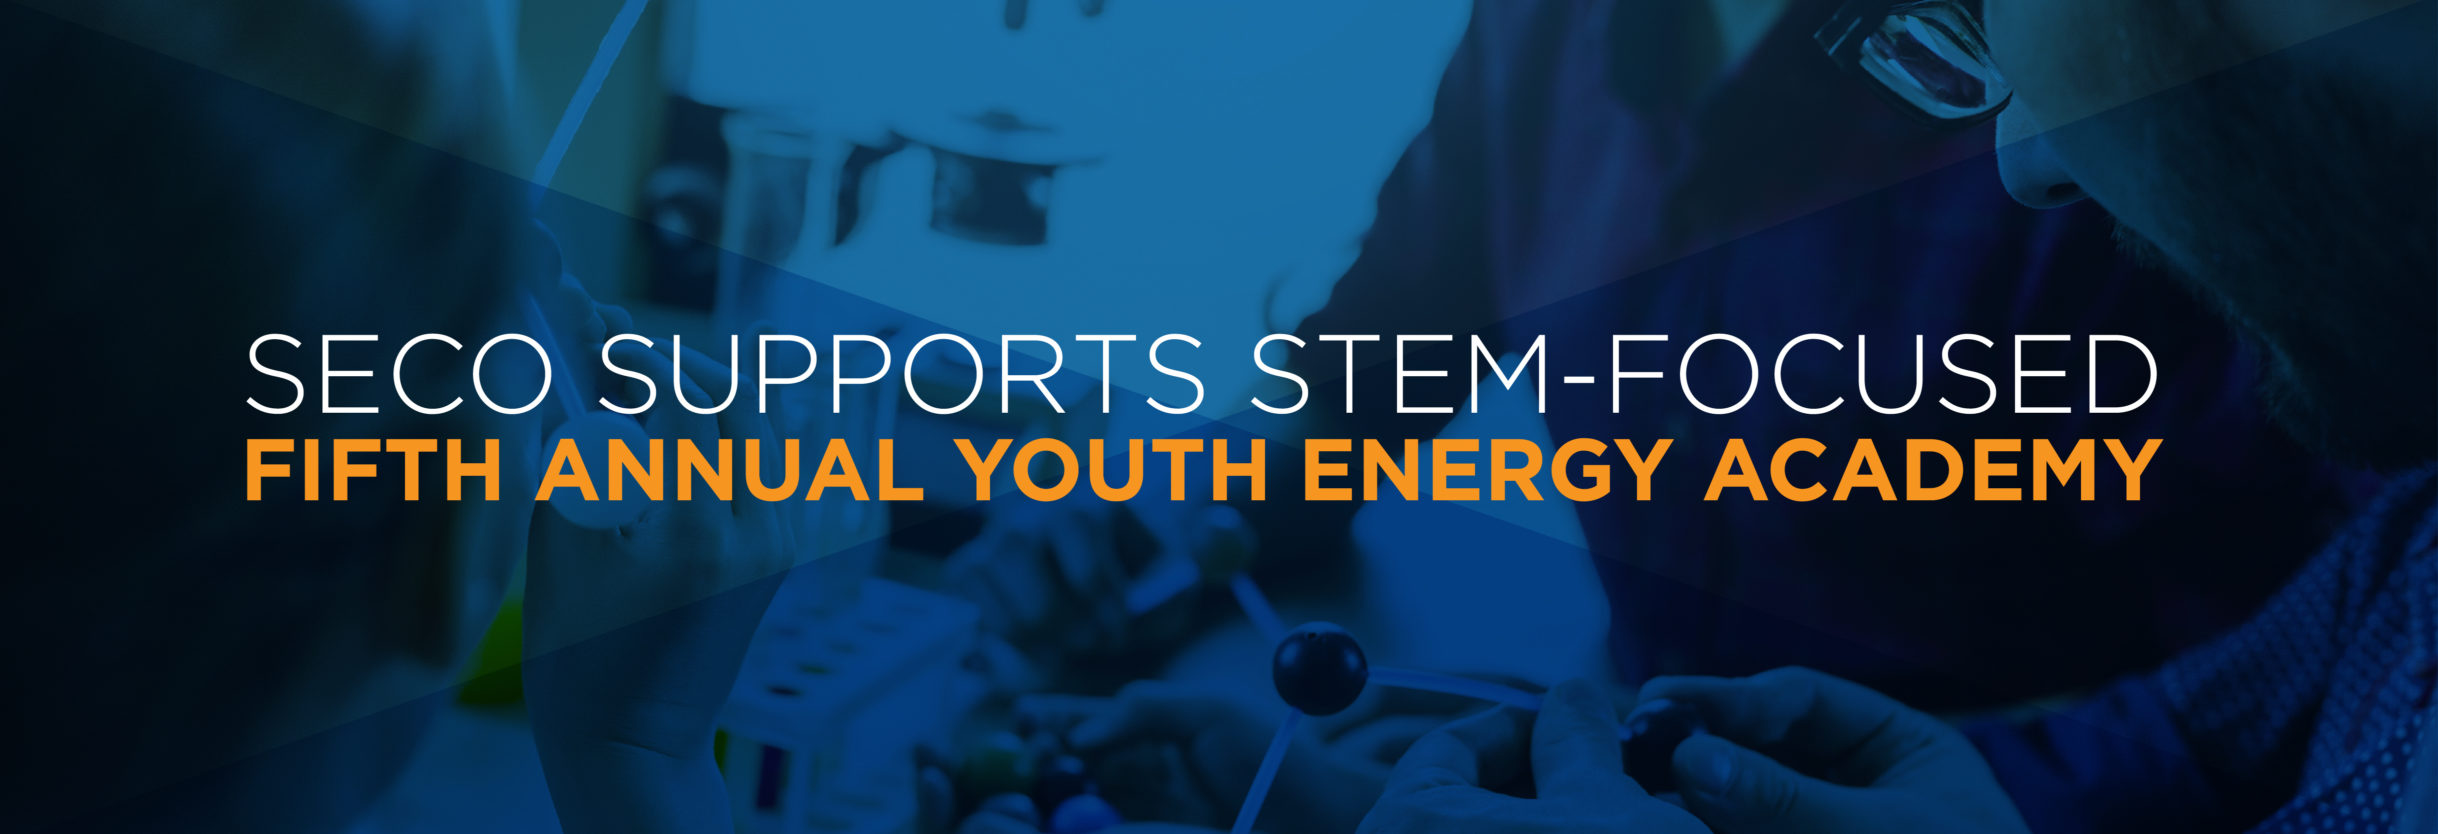 SECO Supports STEM-Focused Fifth Annual Youth Energy Academy